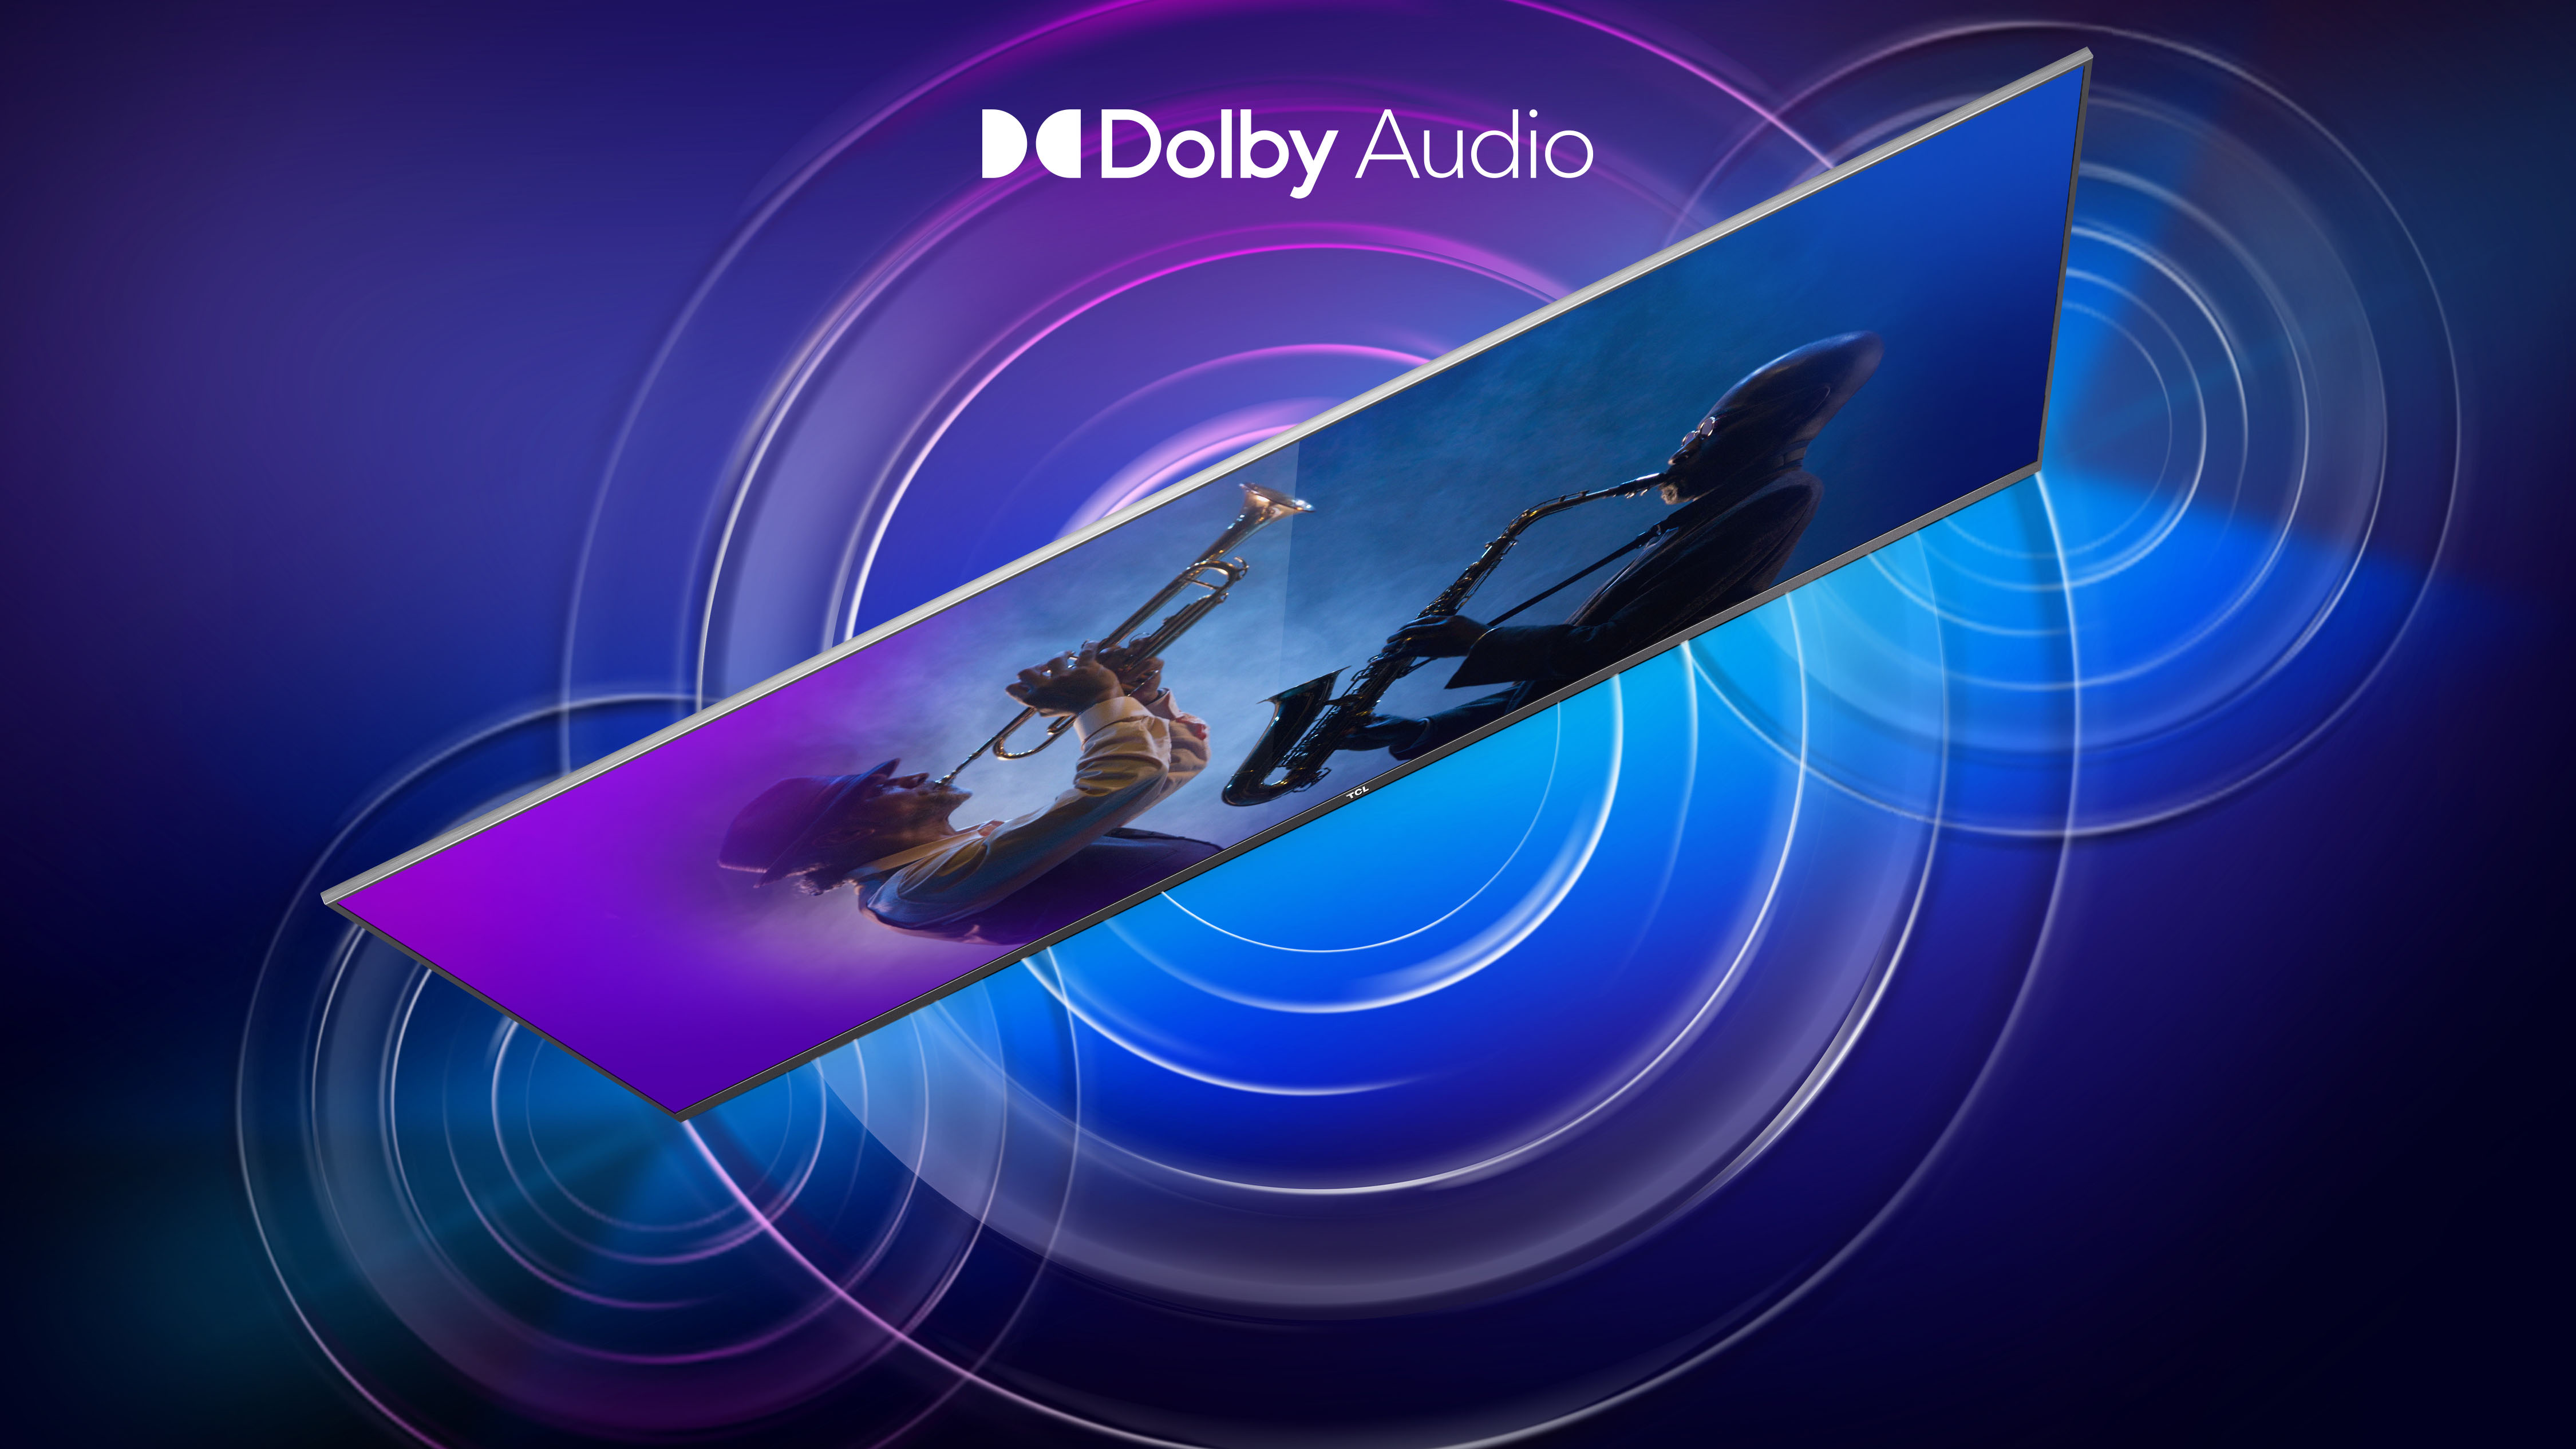 Make your TV sound richer than ever with Dolby Audio